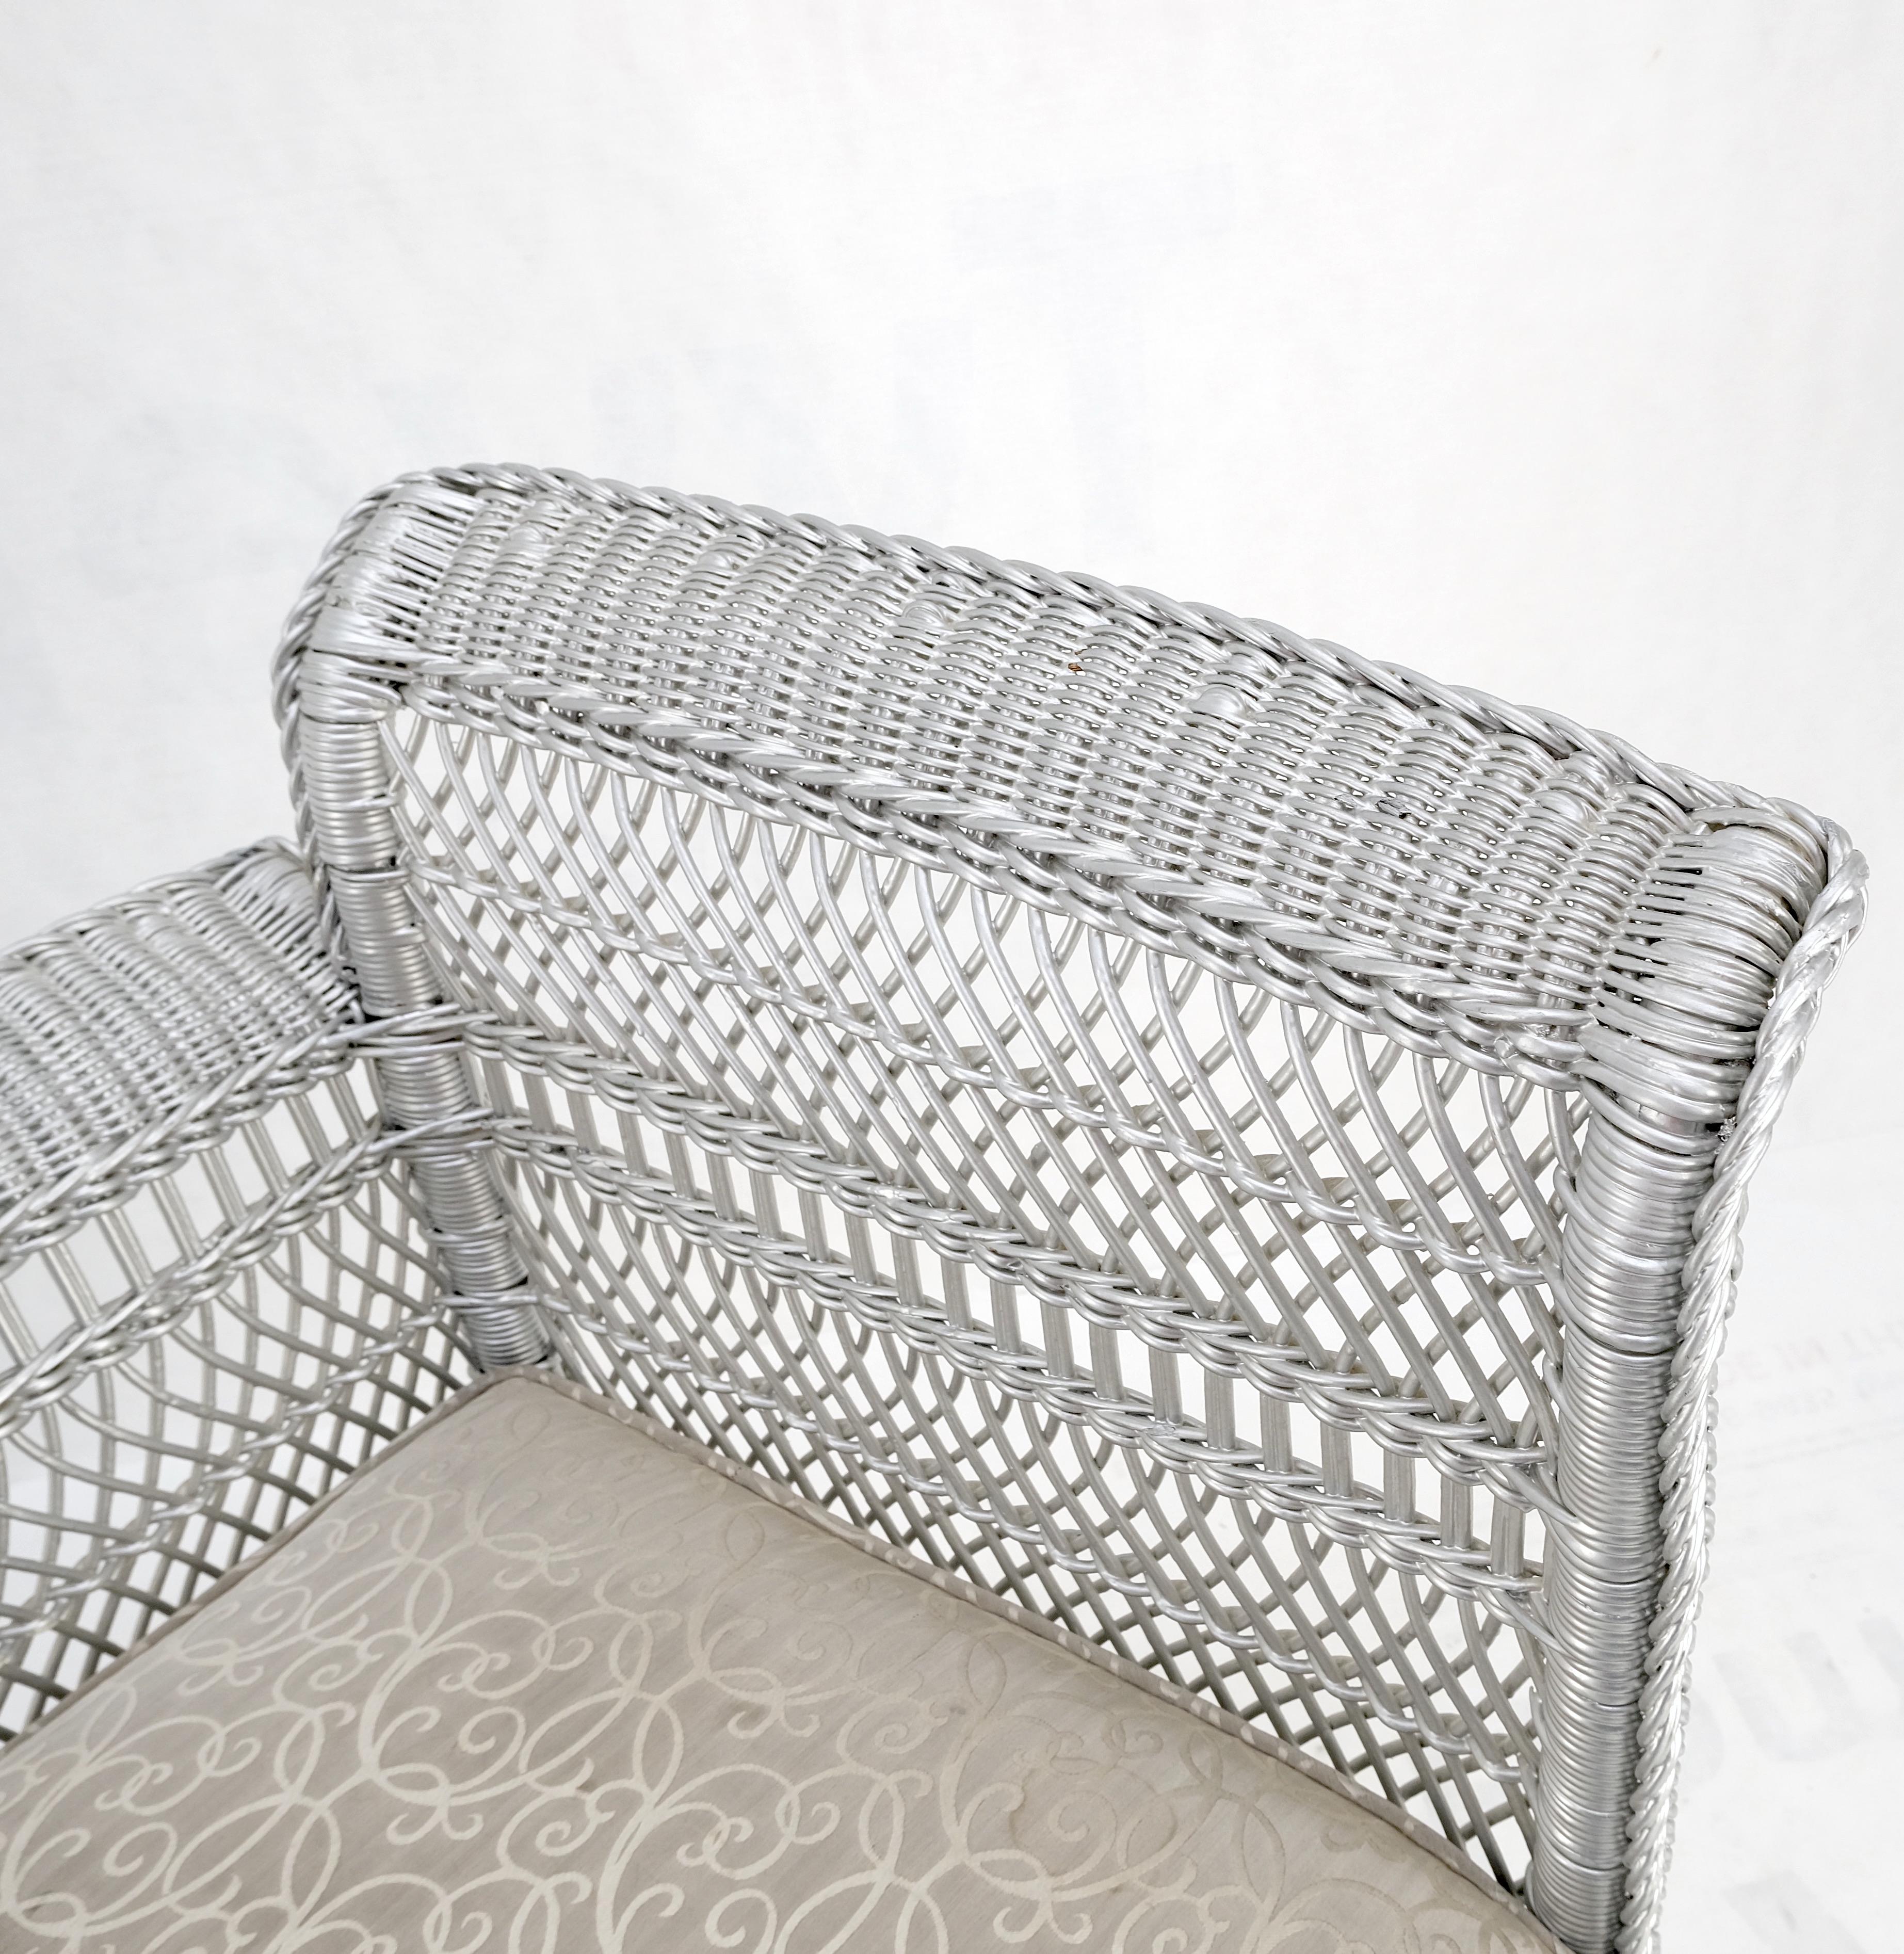 American Antique Wicker Corner Chair Finished Painted in Silver Metal Finish Mint For Sale